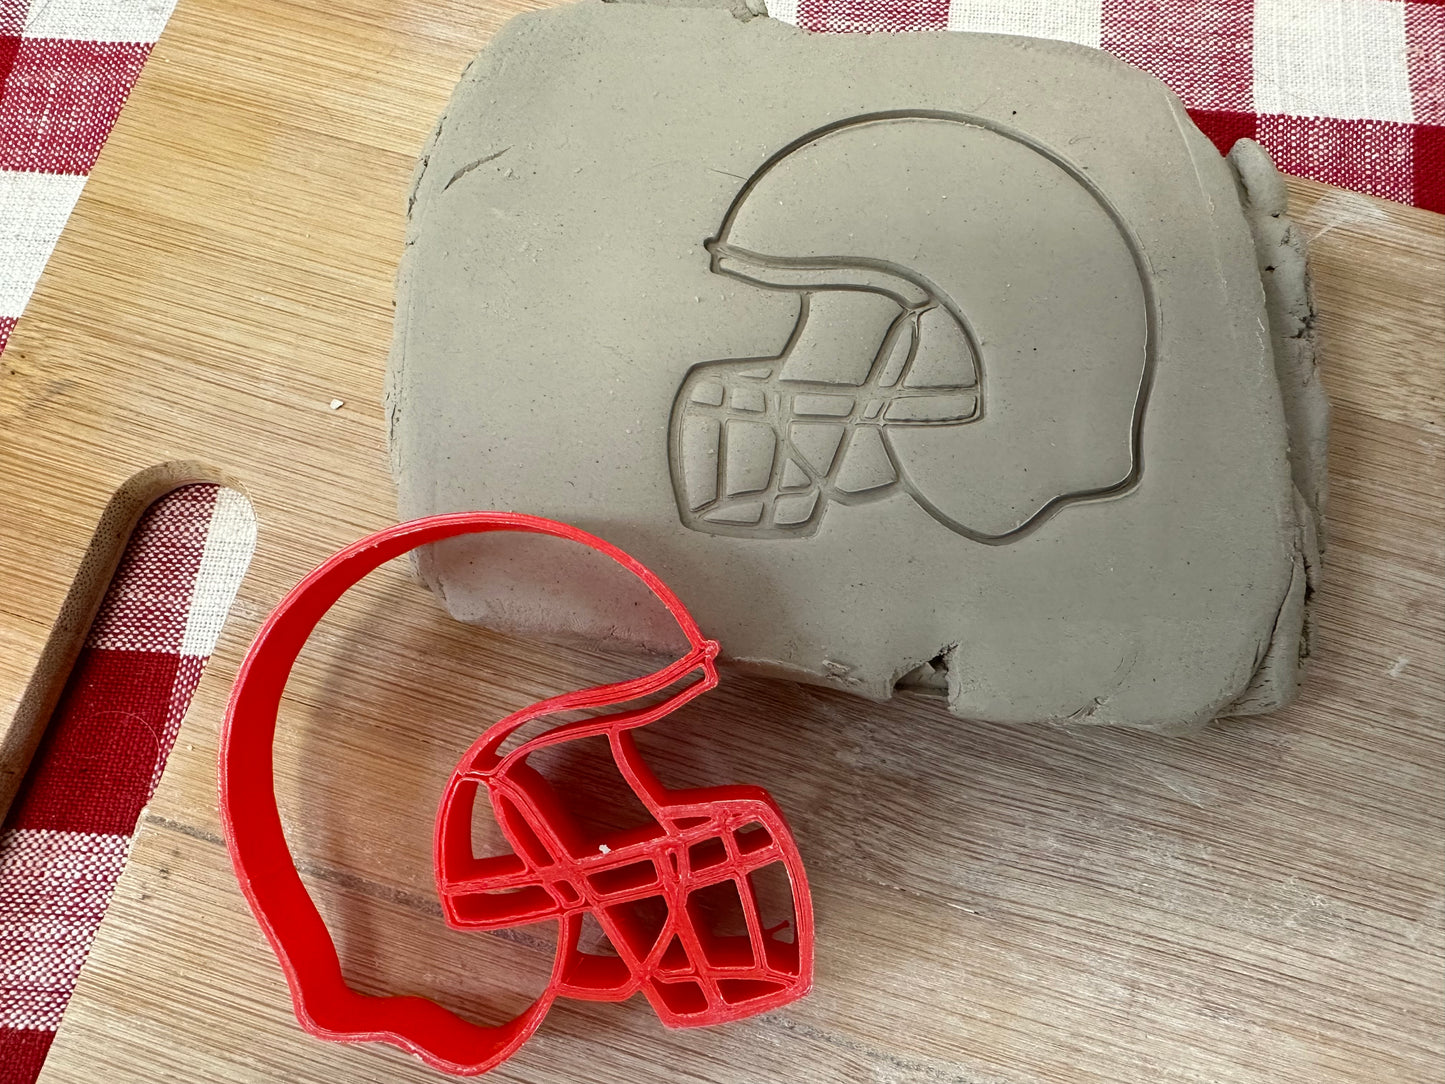 Football Helmet Pottery Stamp - Plastic 3D printed, multiple sizes available